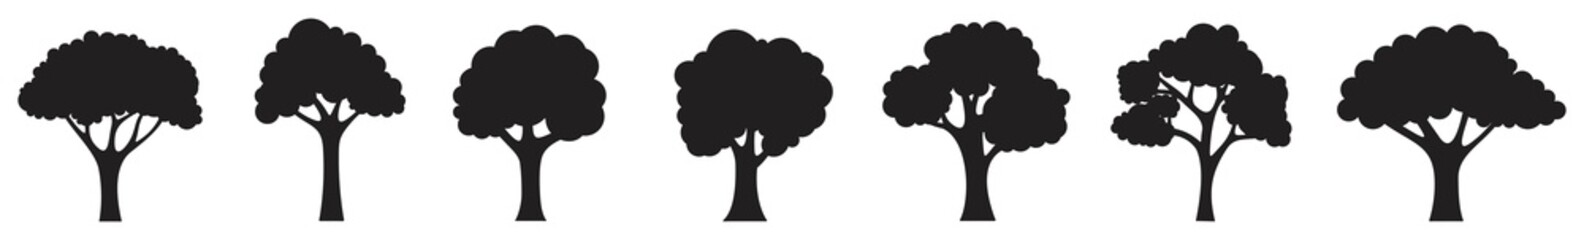 tree icon set. Tree silhouettes. isolated on white background, vector illustration